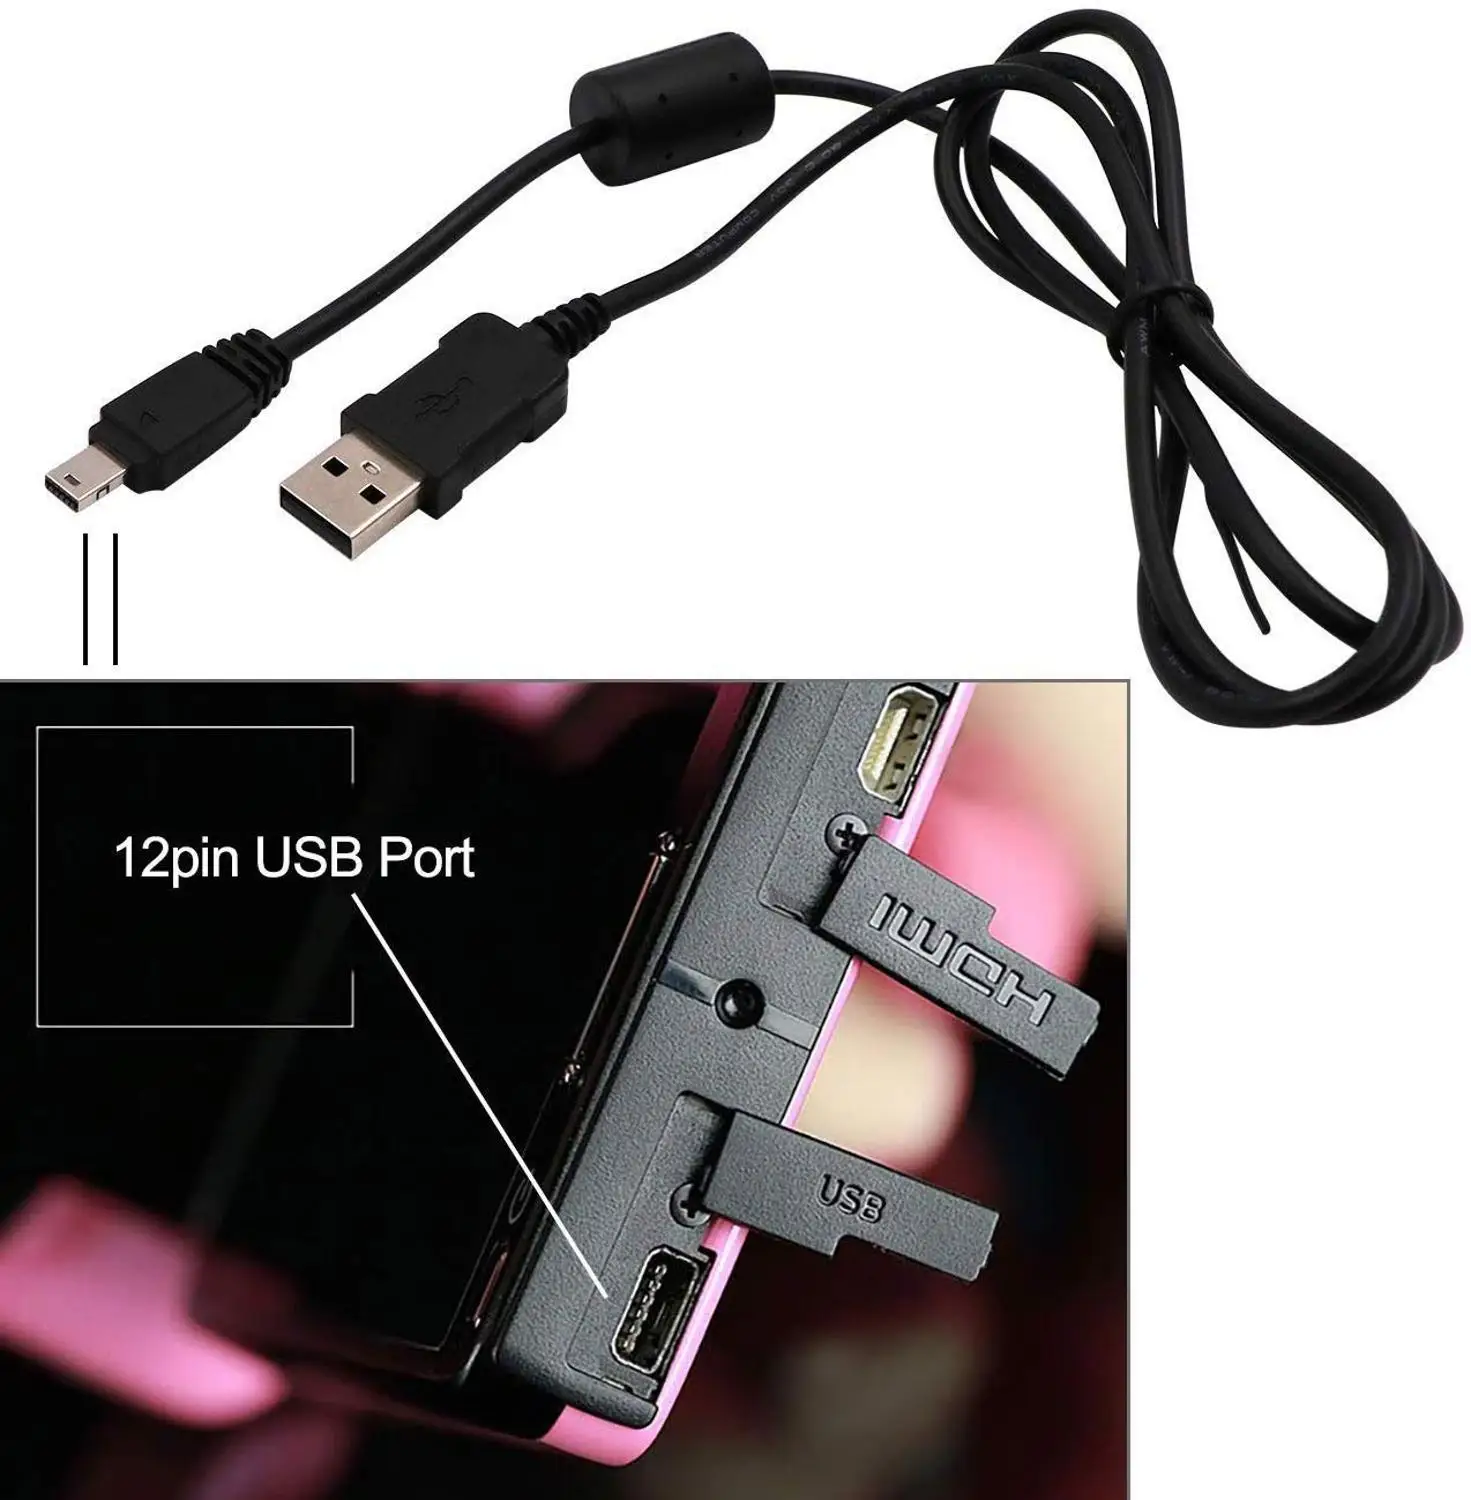 

Replacement USB Data Charging Cable 12Pin USB Port Power Cord Compatible For Casio Exilim Camera EX-S10 S12 H10 F1 FS10 FC100